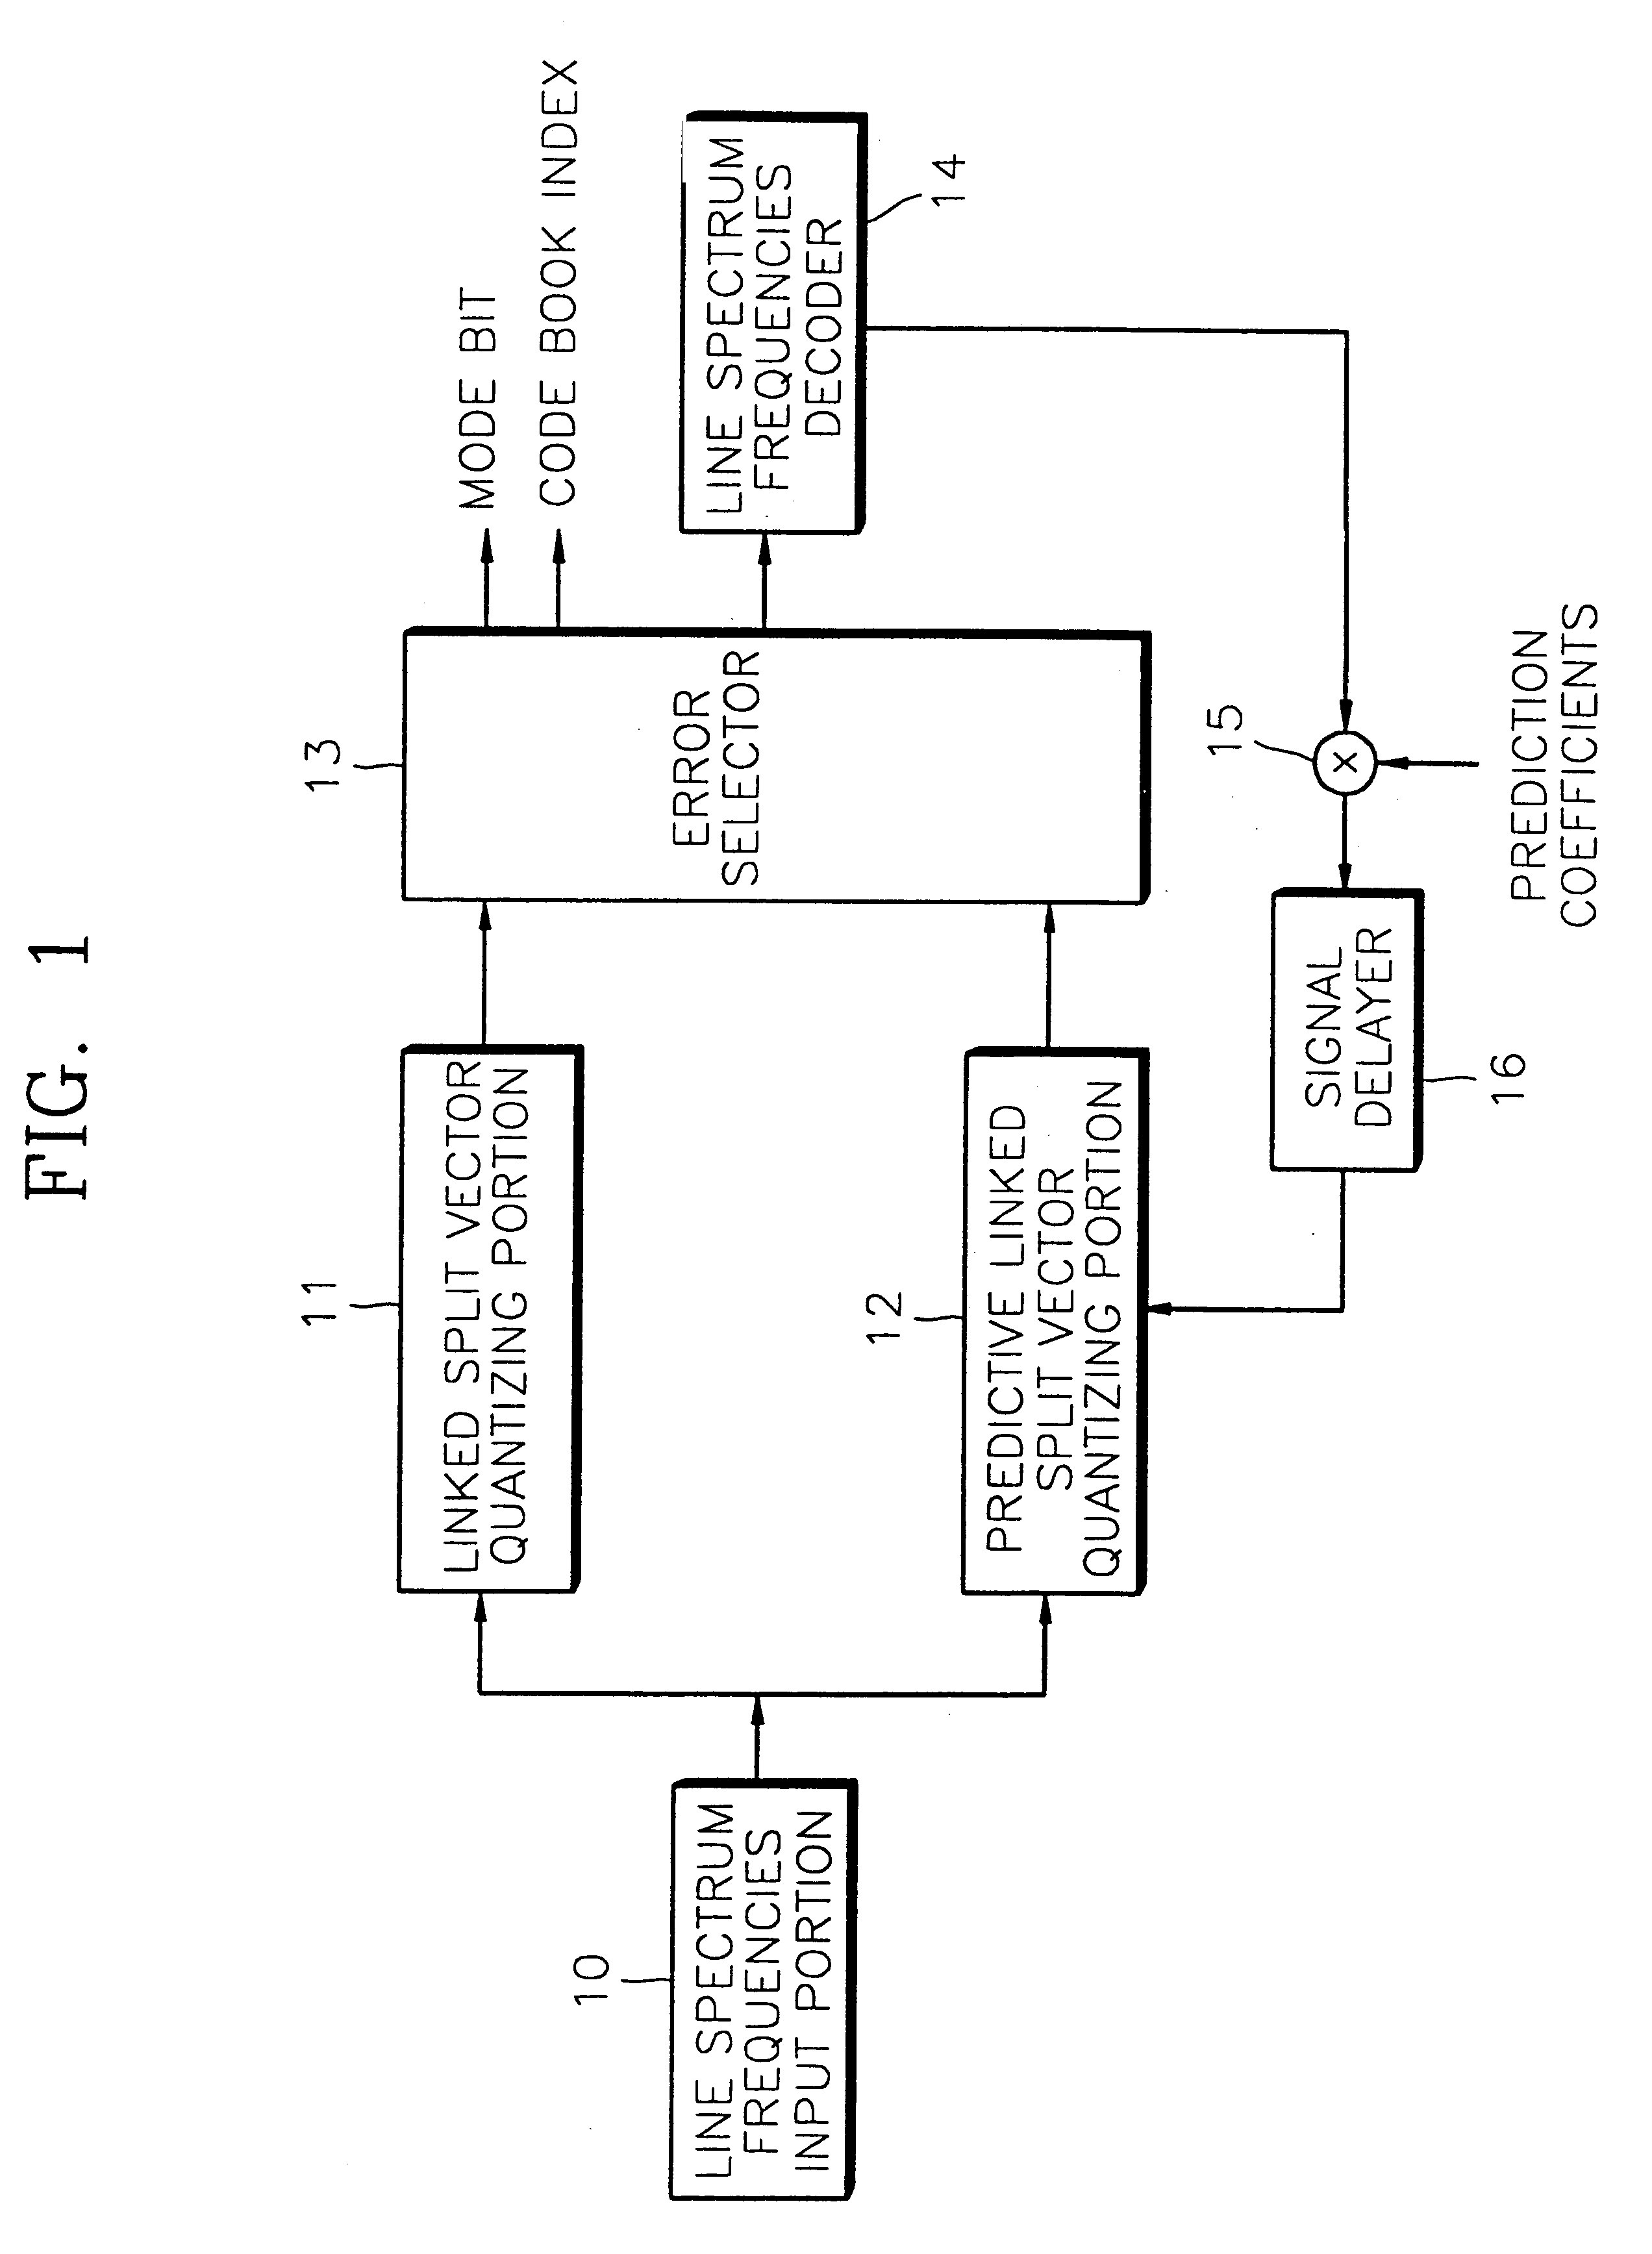 Apparatus for quantizing spectral envelope including error selector for selecting a codebook index of a quantized LSF having a smaller error value and method therefor